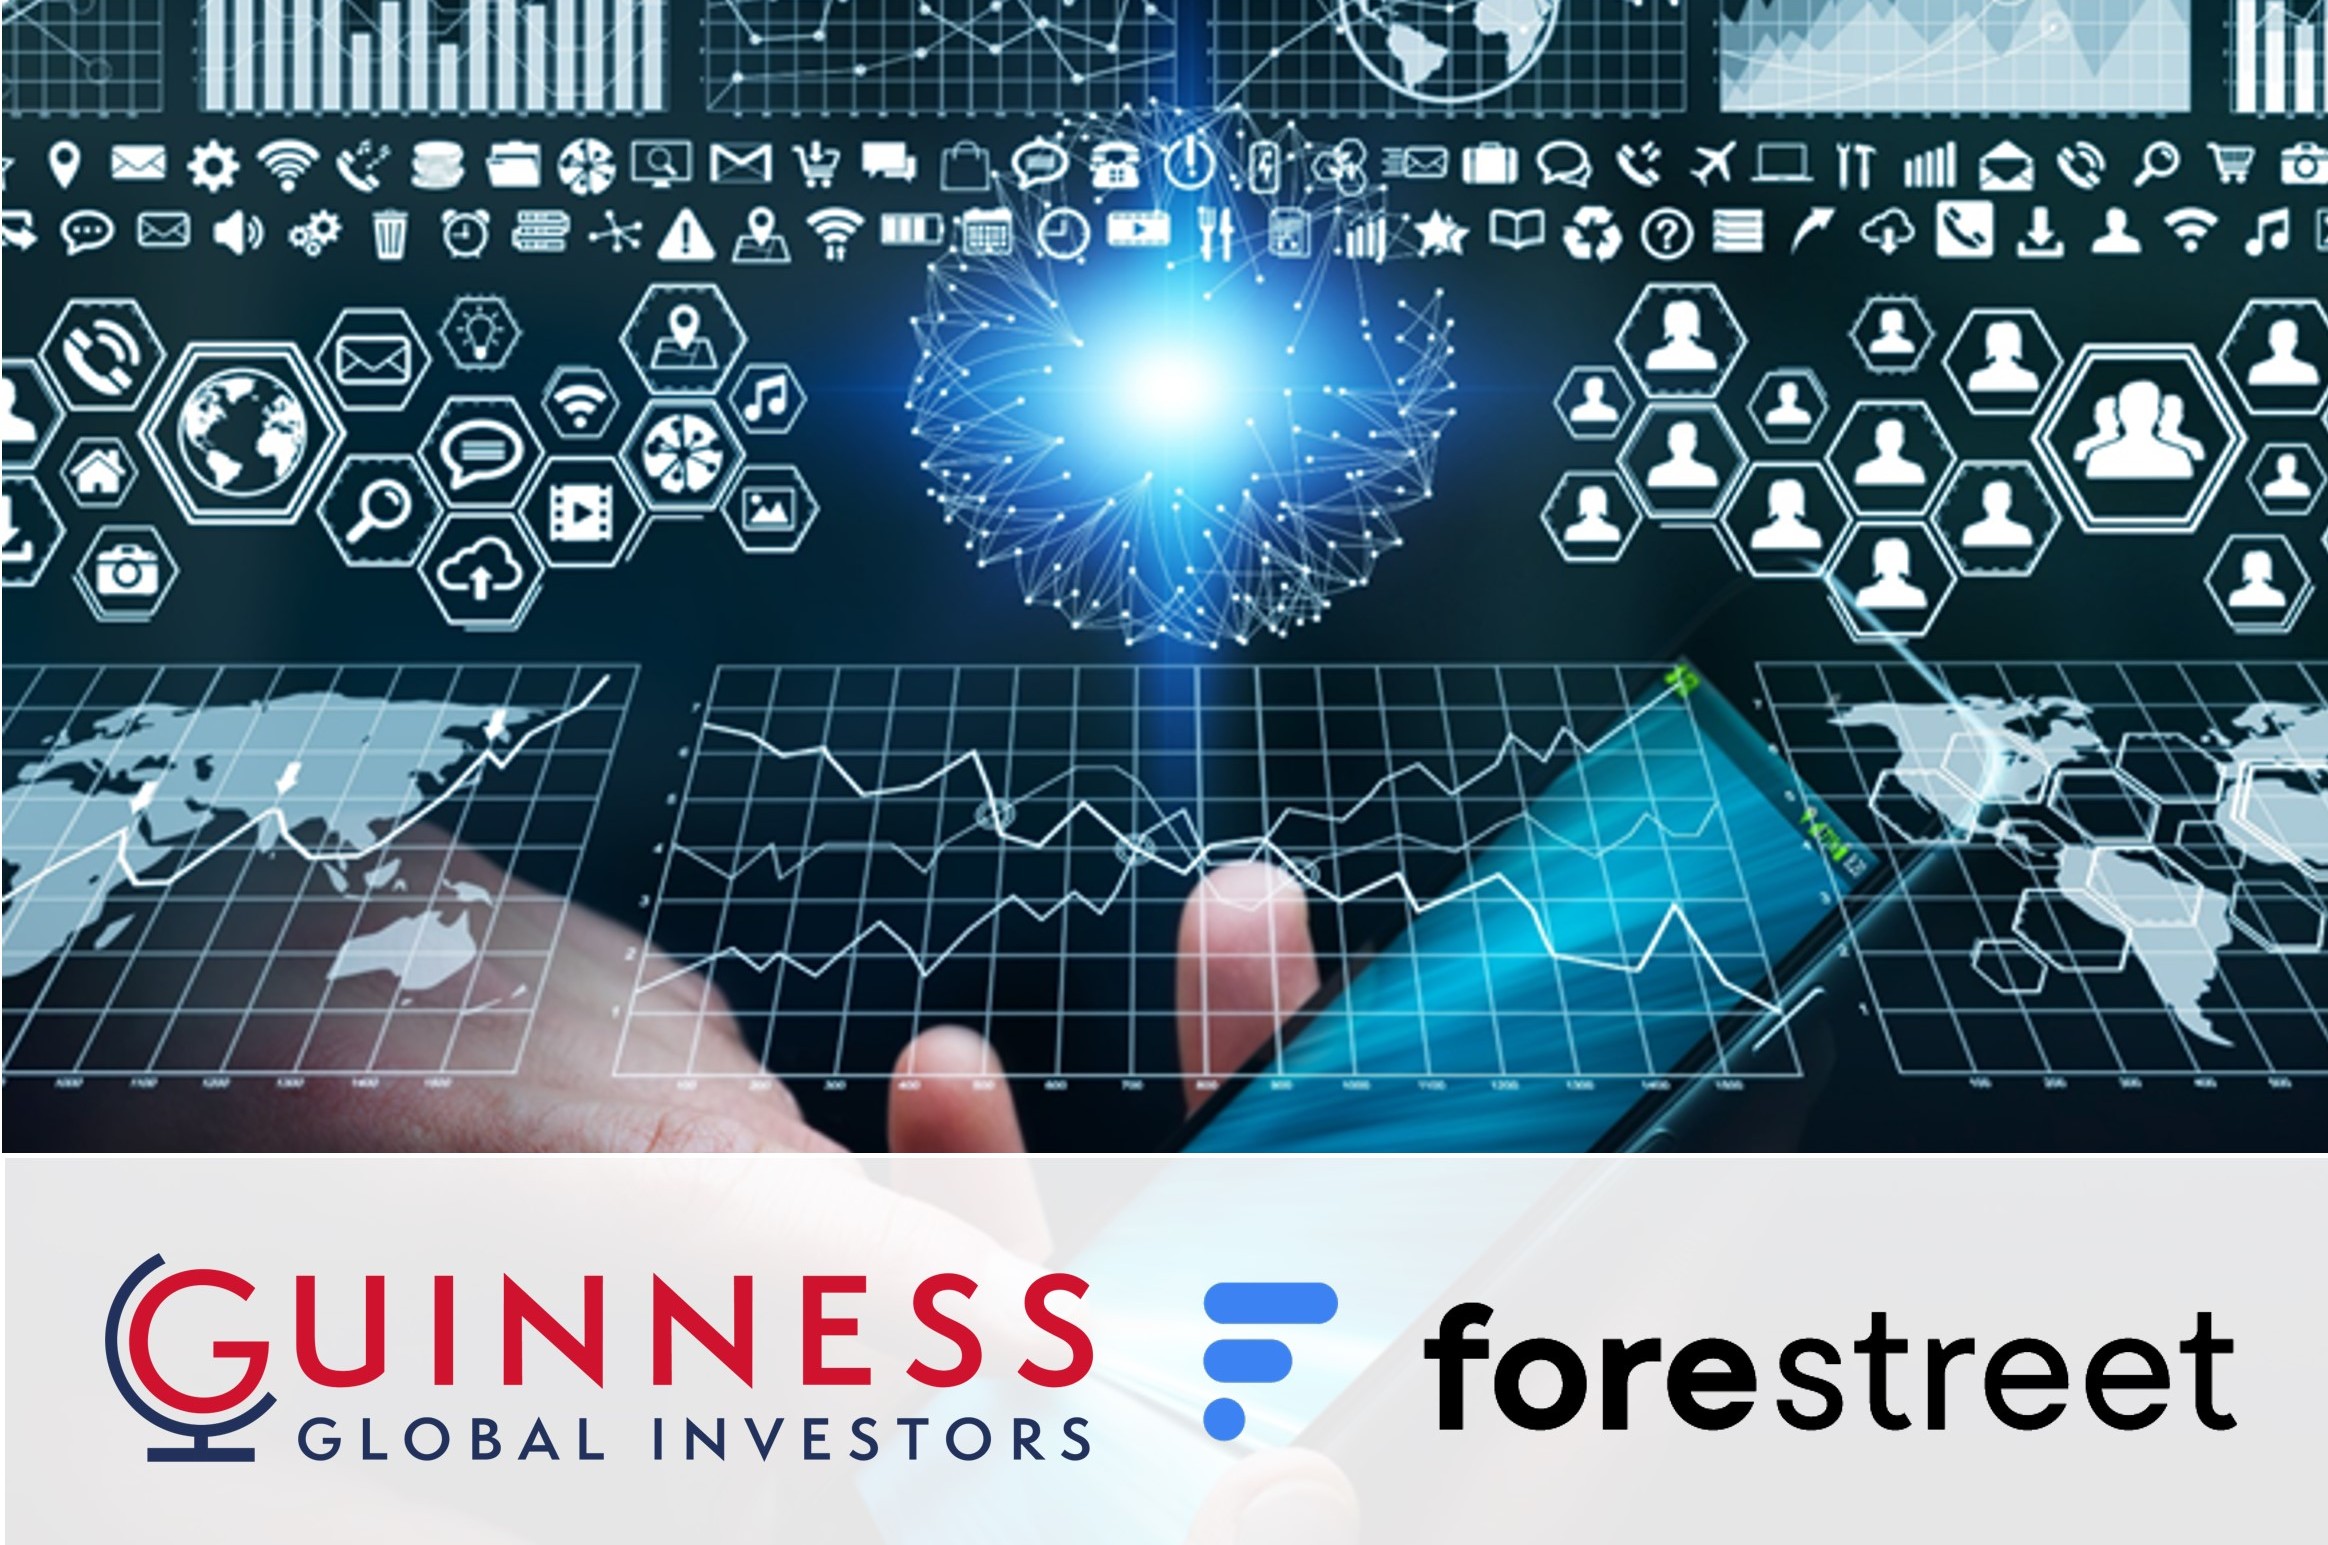 Luminii provides Commercial Due Diligence to Guinness on their investment into Forestreet